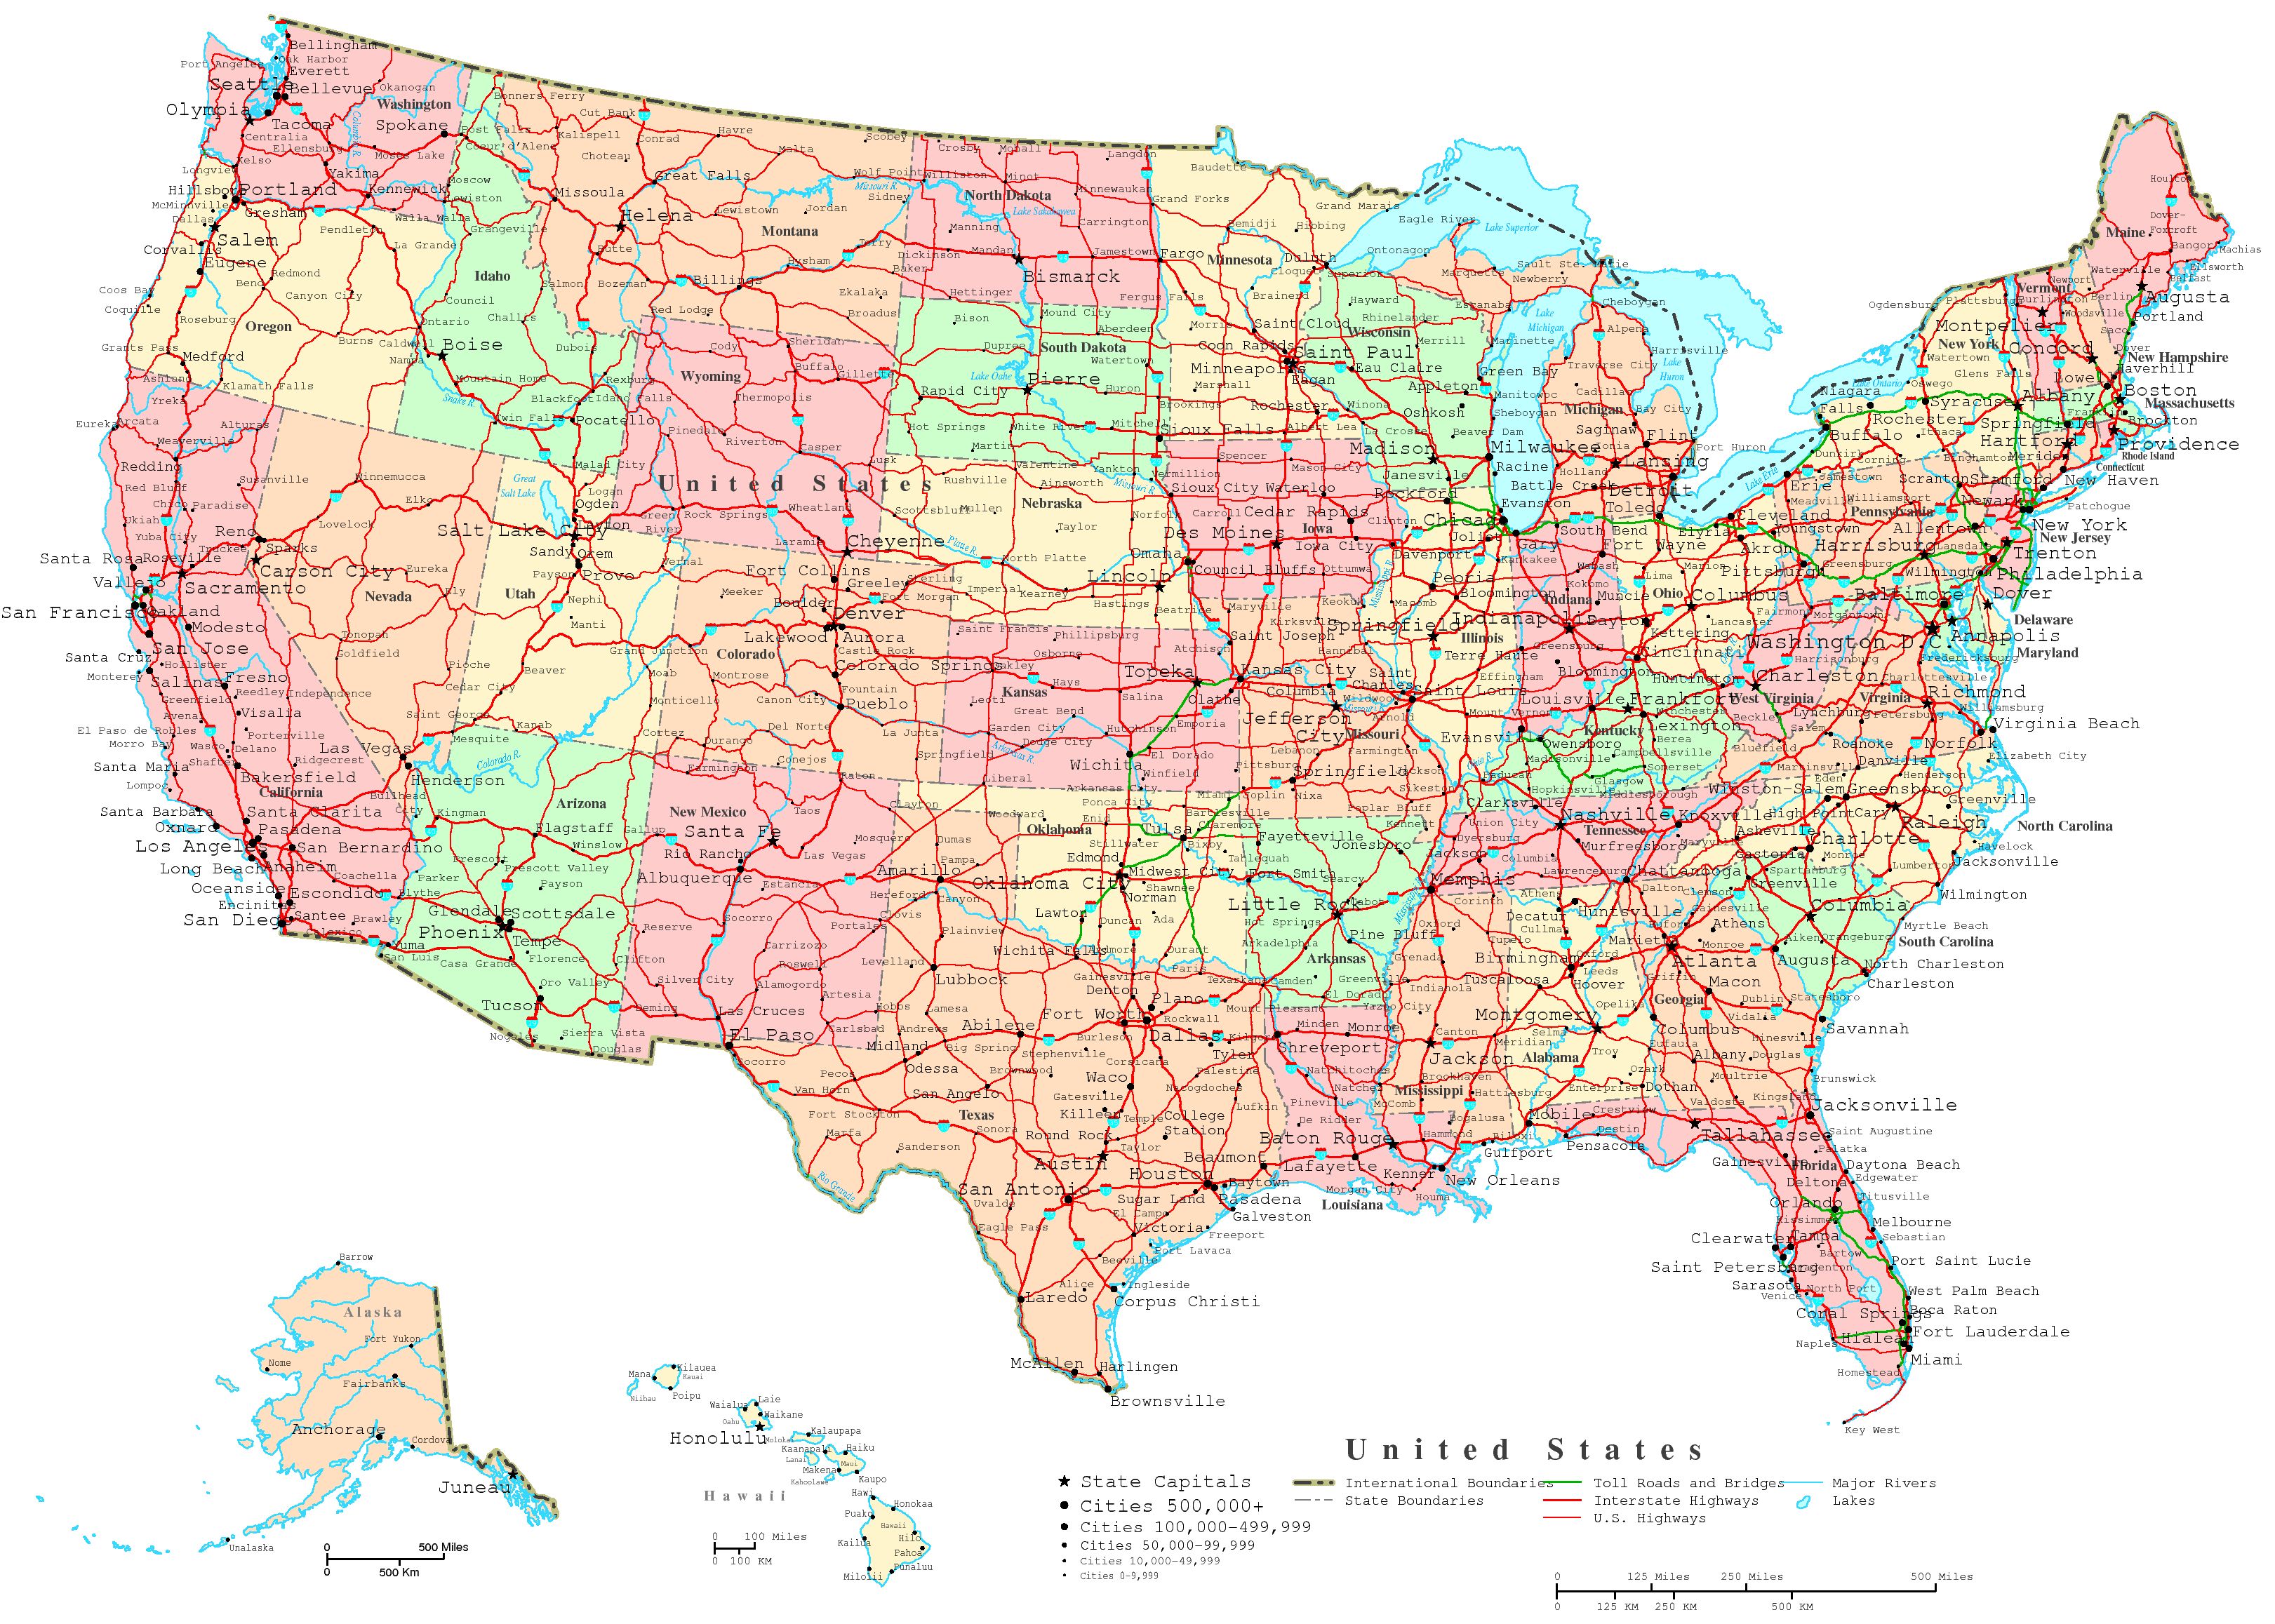 Maps Of The Usa The United States Of America Map Library Maps Of